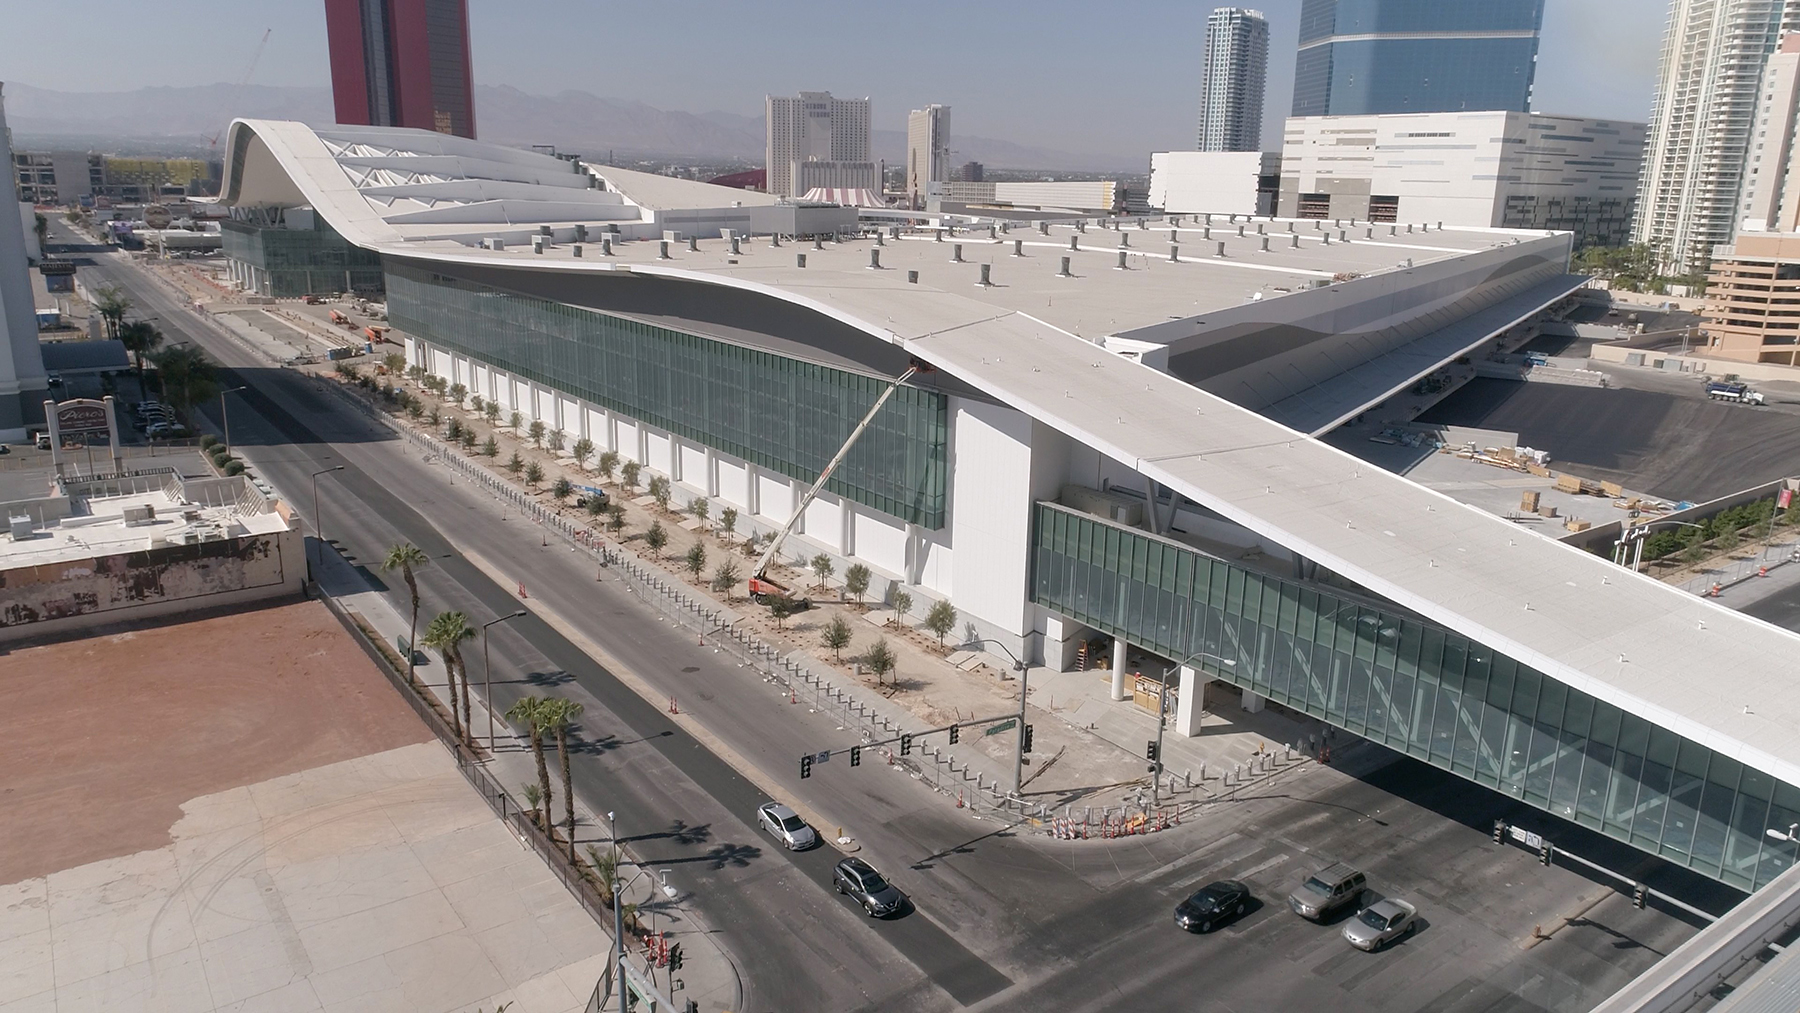 New hall opens at Las Vegas Convention Center